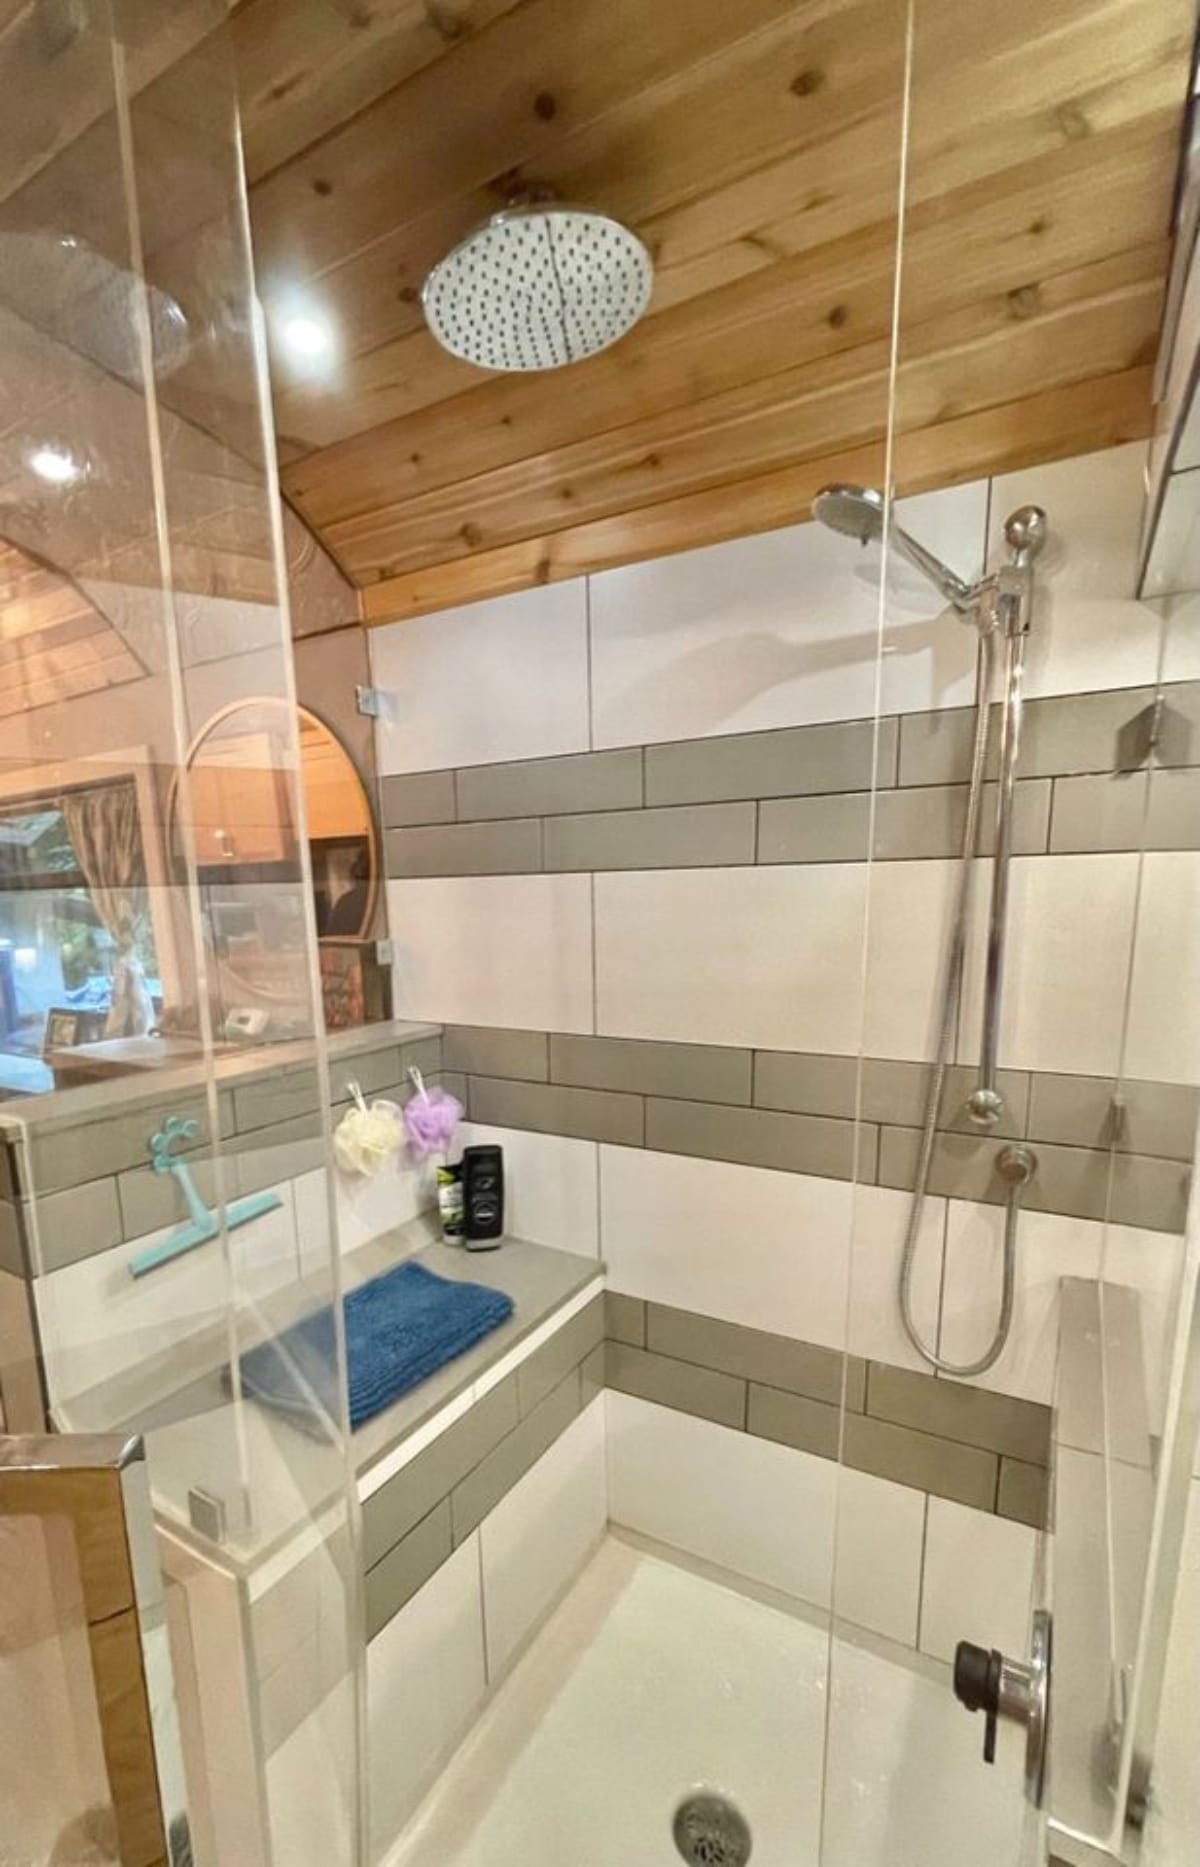 Shower area of 40' School Bus Converted Tiny House